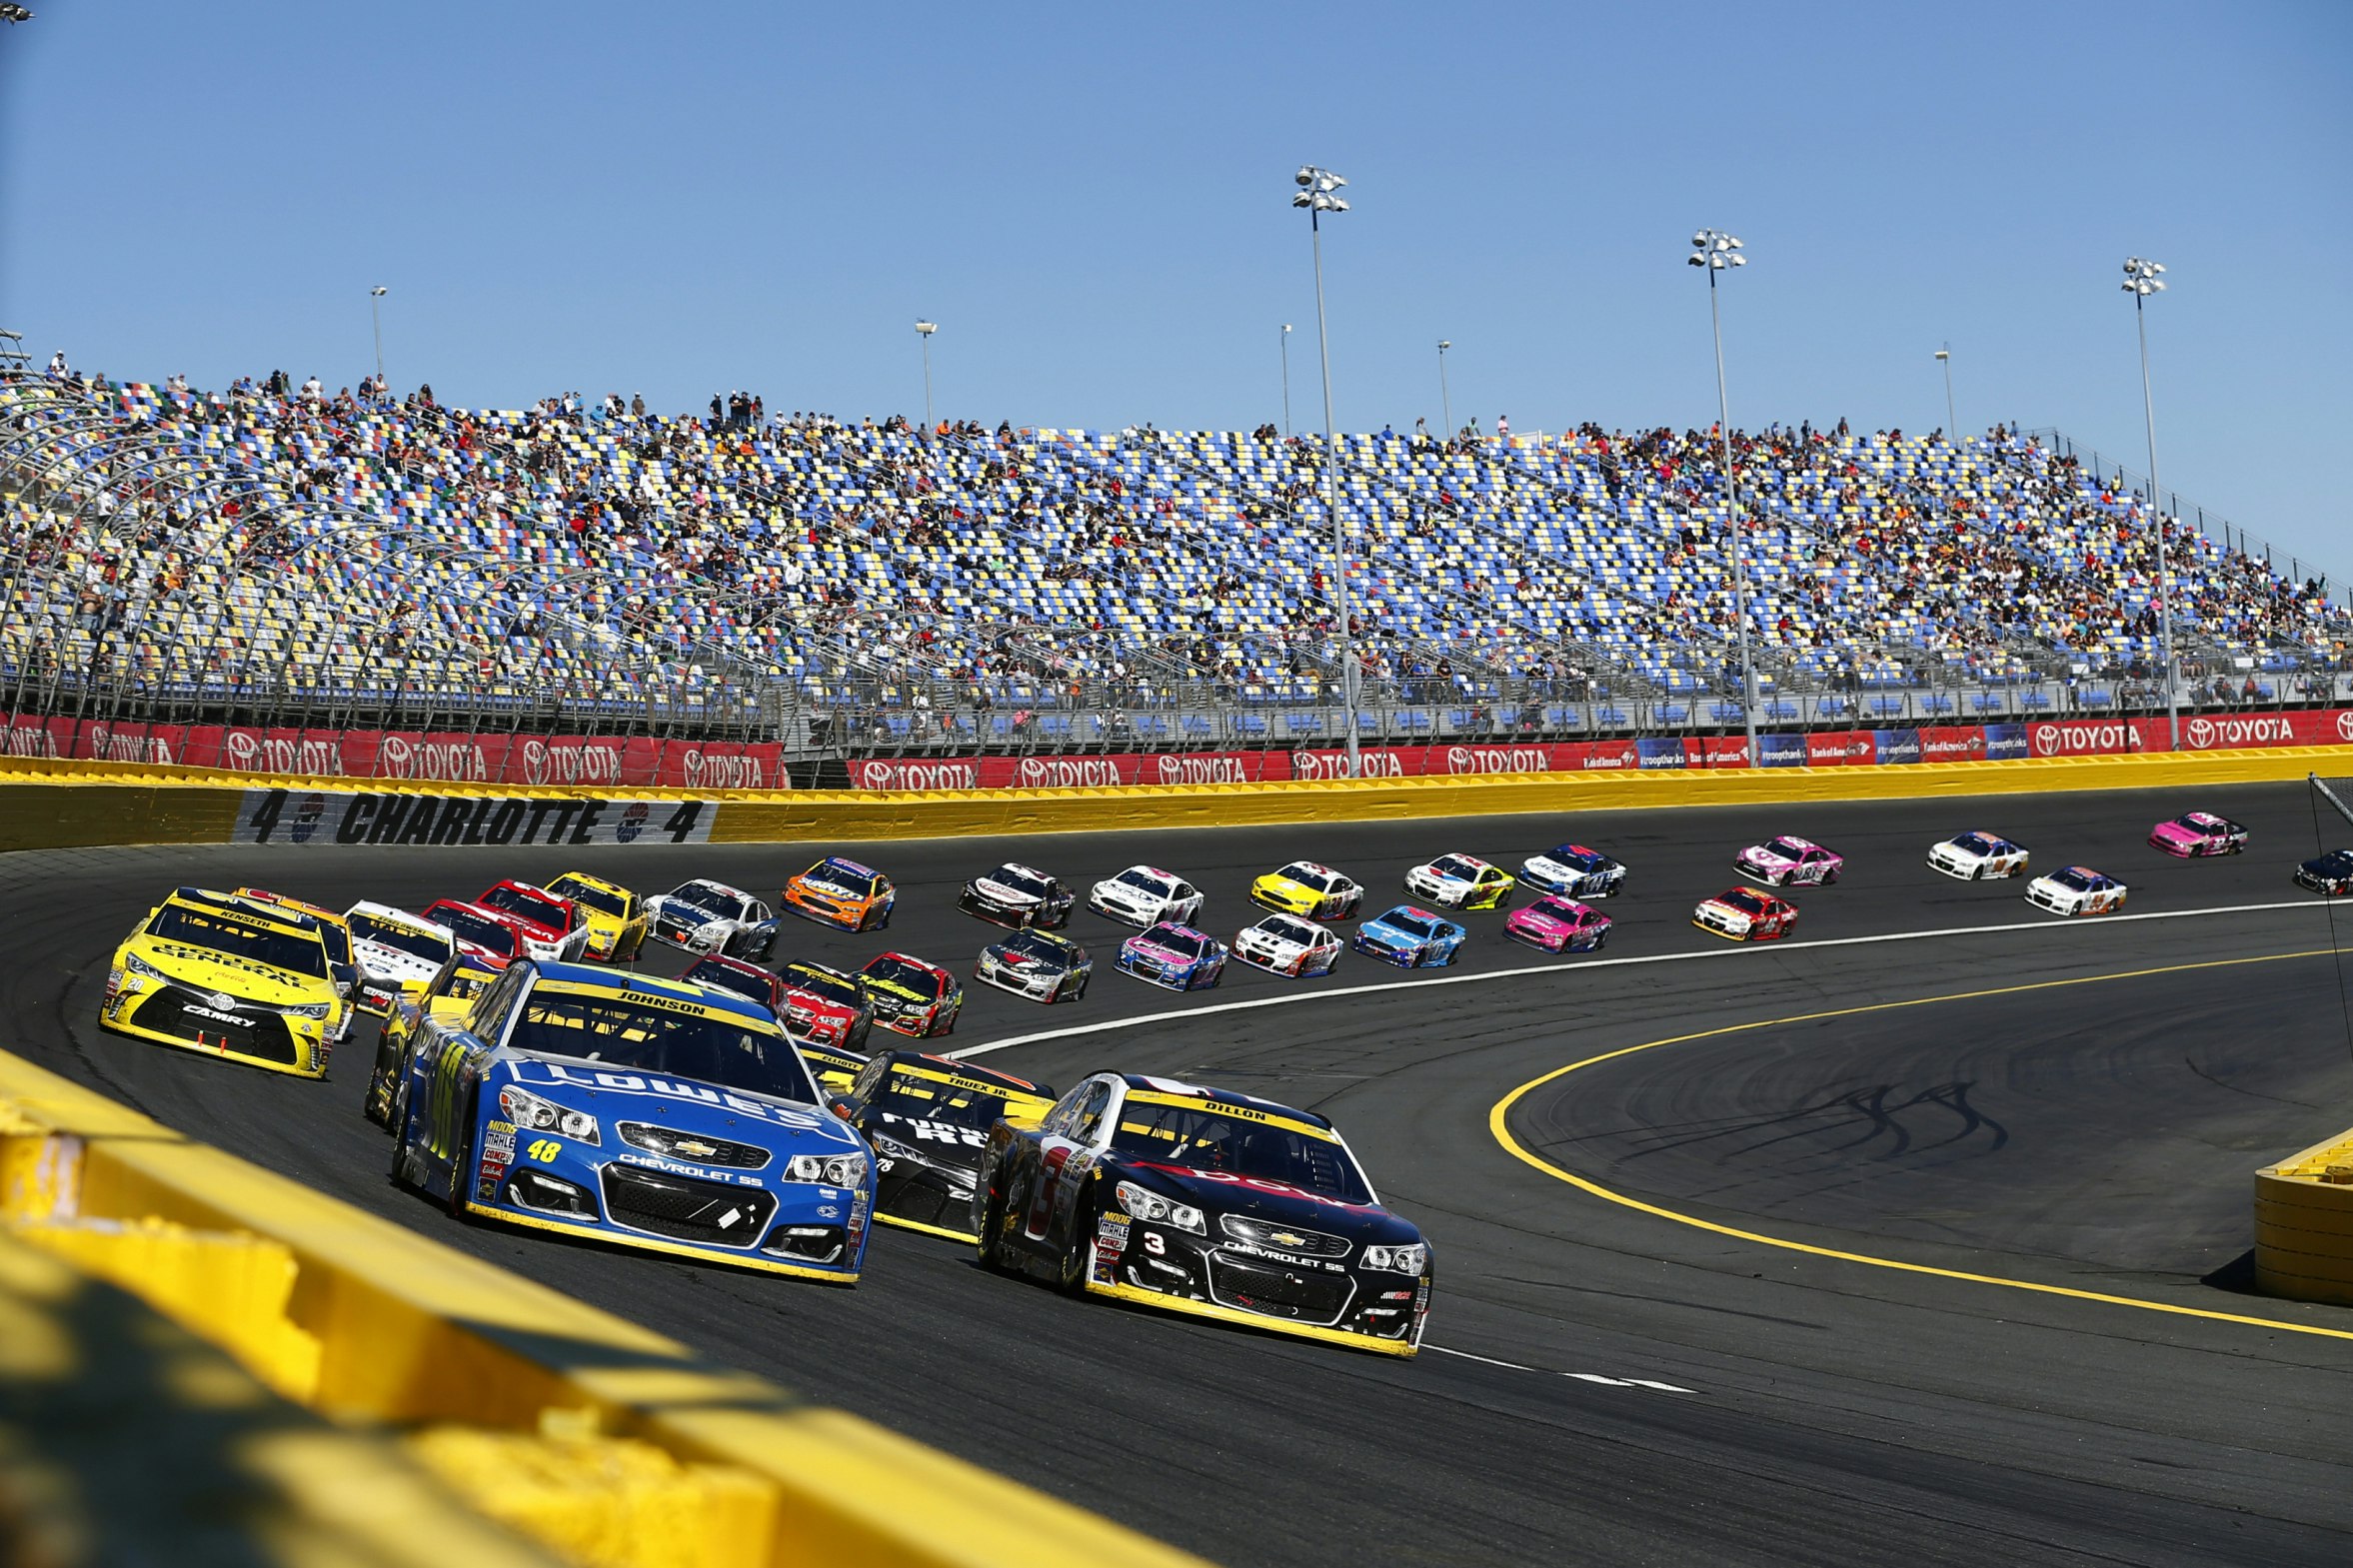 NASCAR event takes place in Charlotte, NC